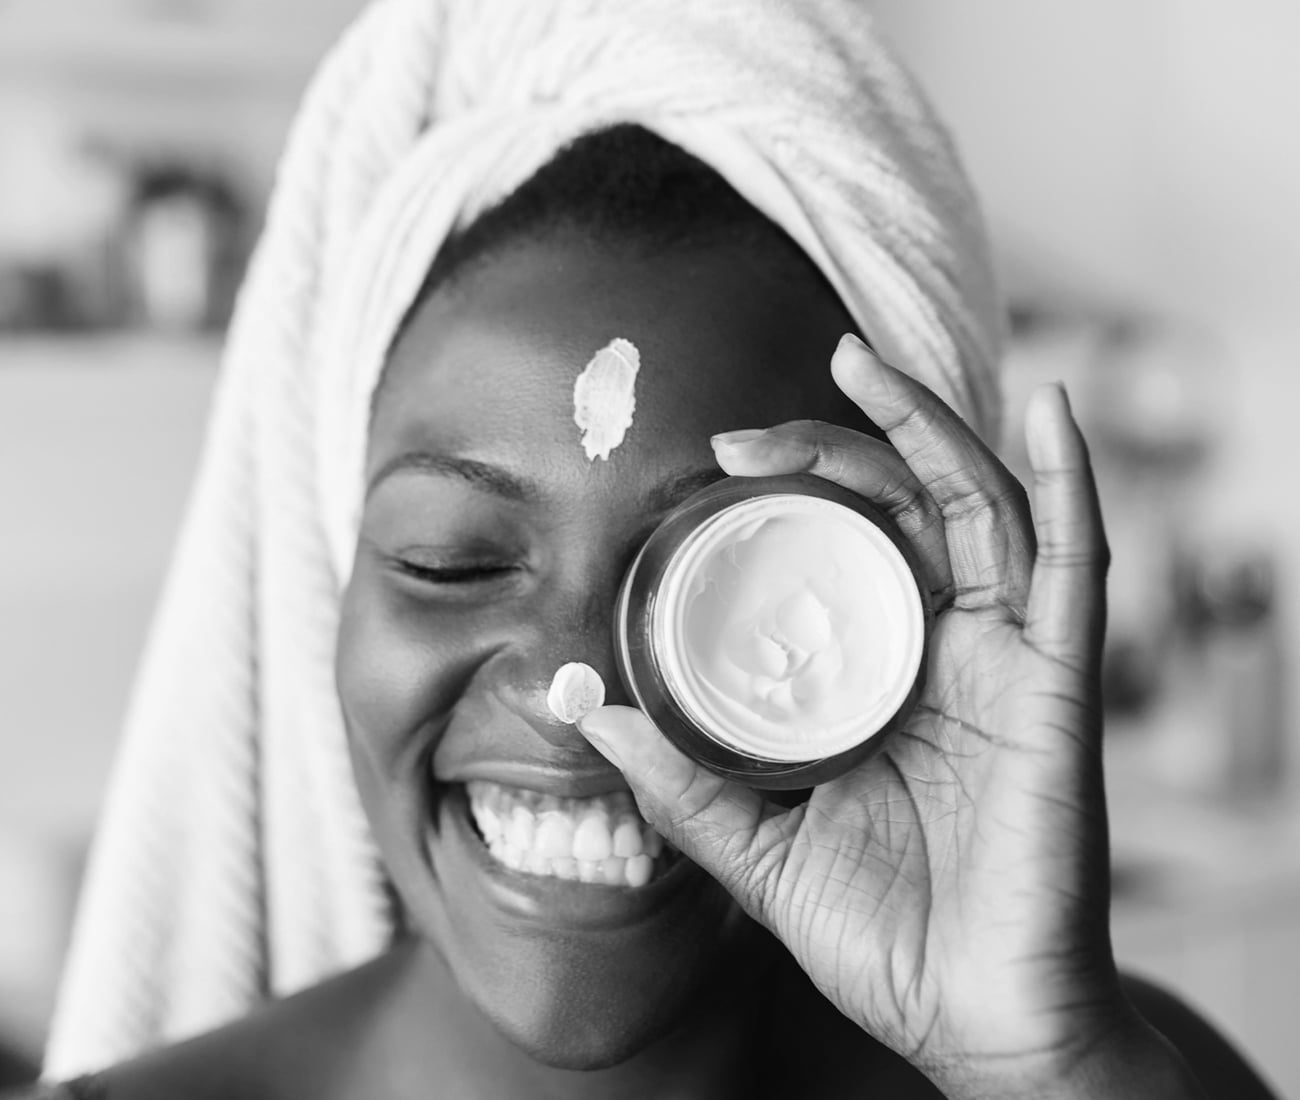 Black And White Photo Of A Woman With A Towel On Her Head, Holding Up A Cream In A Round Container, With Spots Of The Cream On Her Nose And Forehead, Smiling